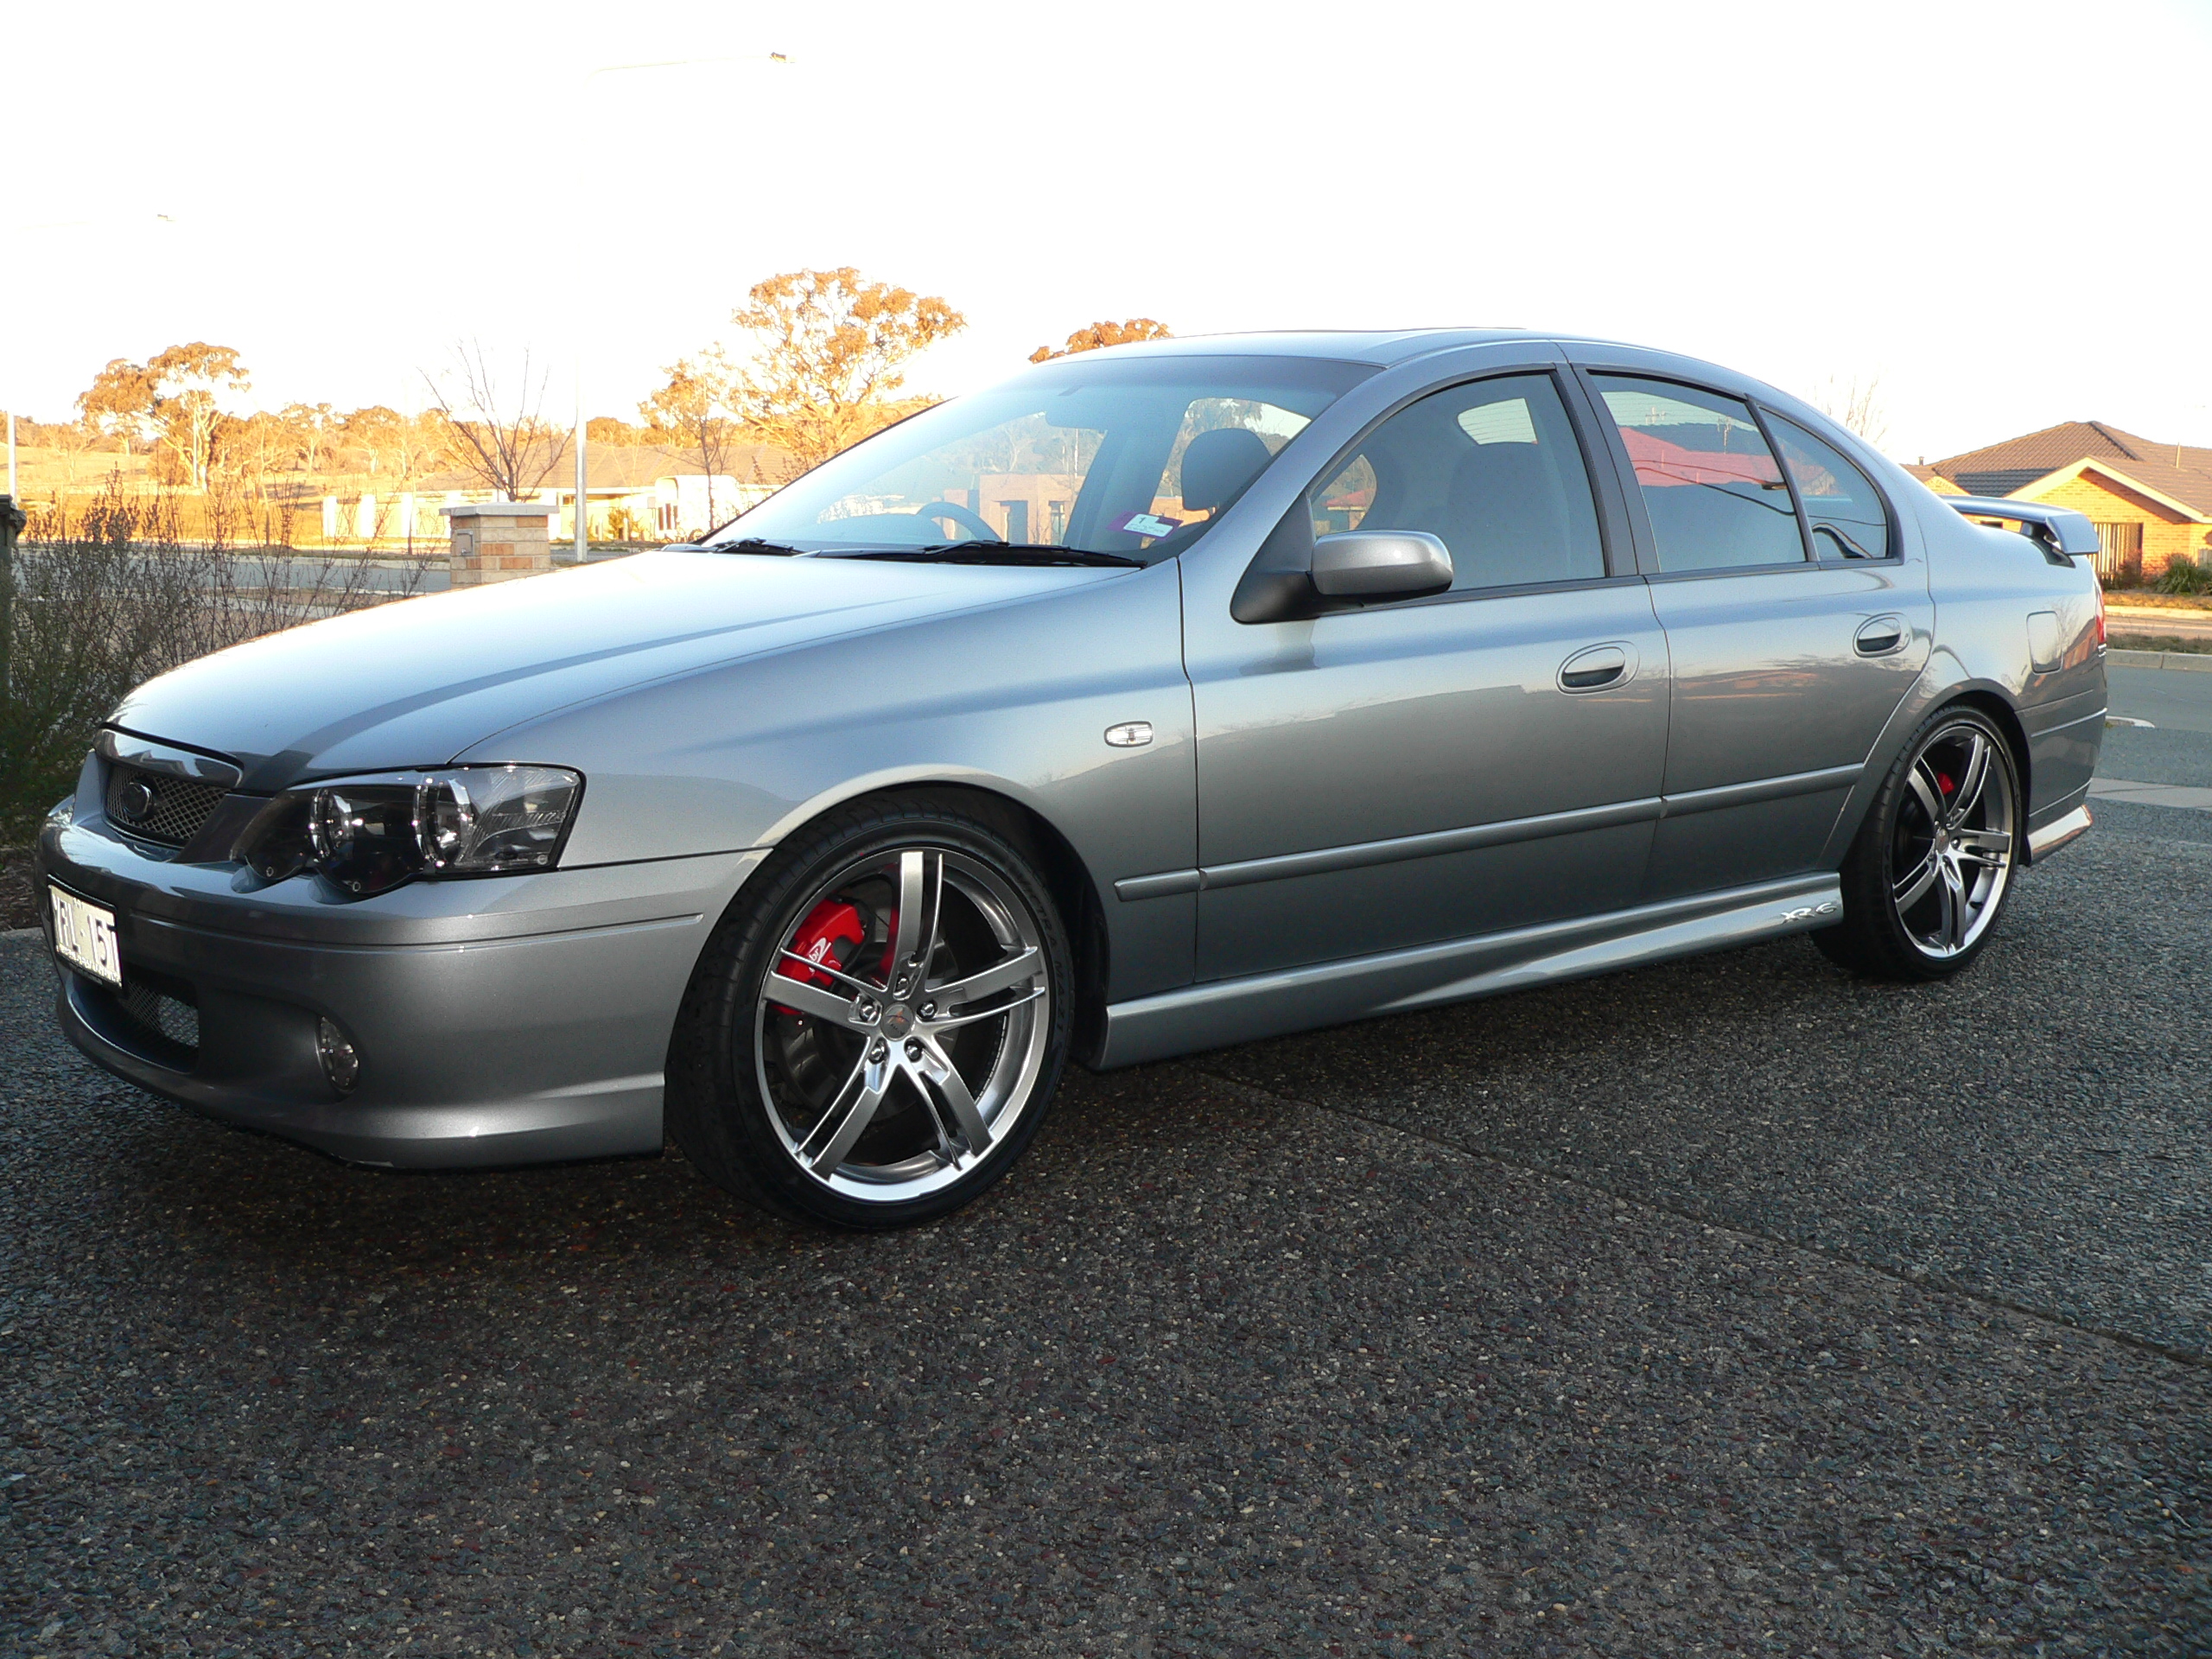 2004 Ford Falcon Xr6 Turbo Review Caradvice